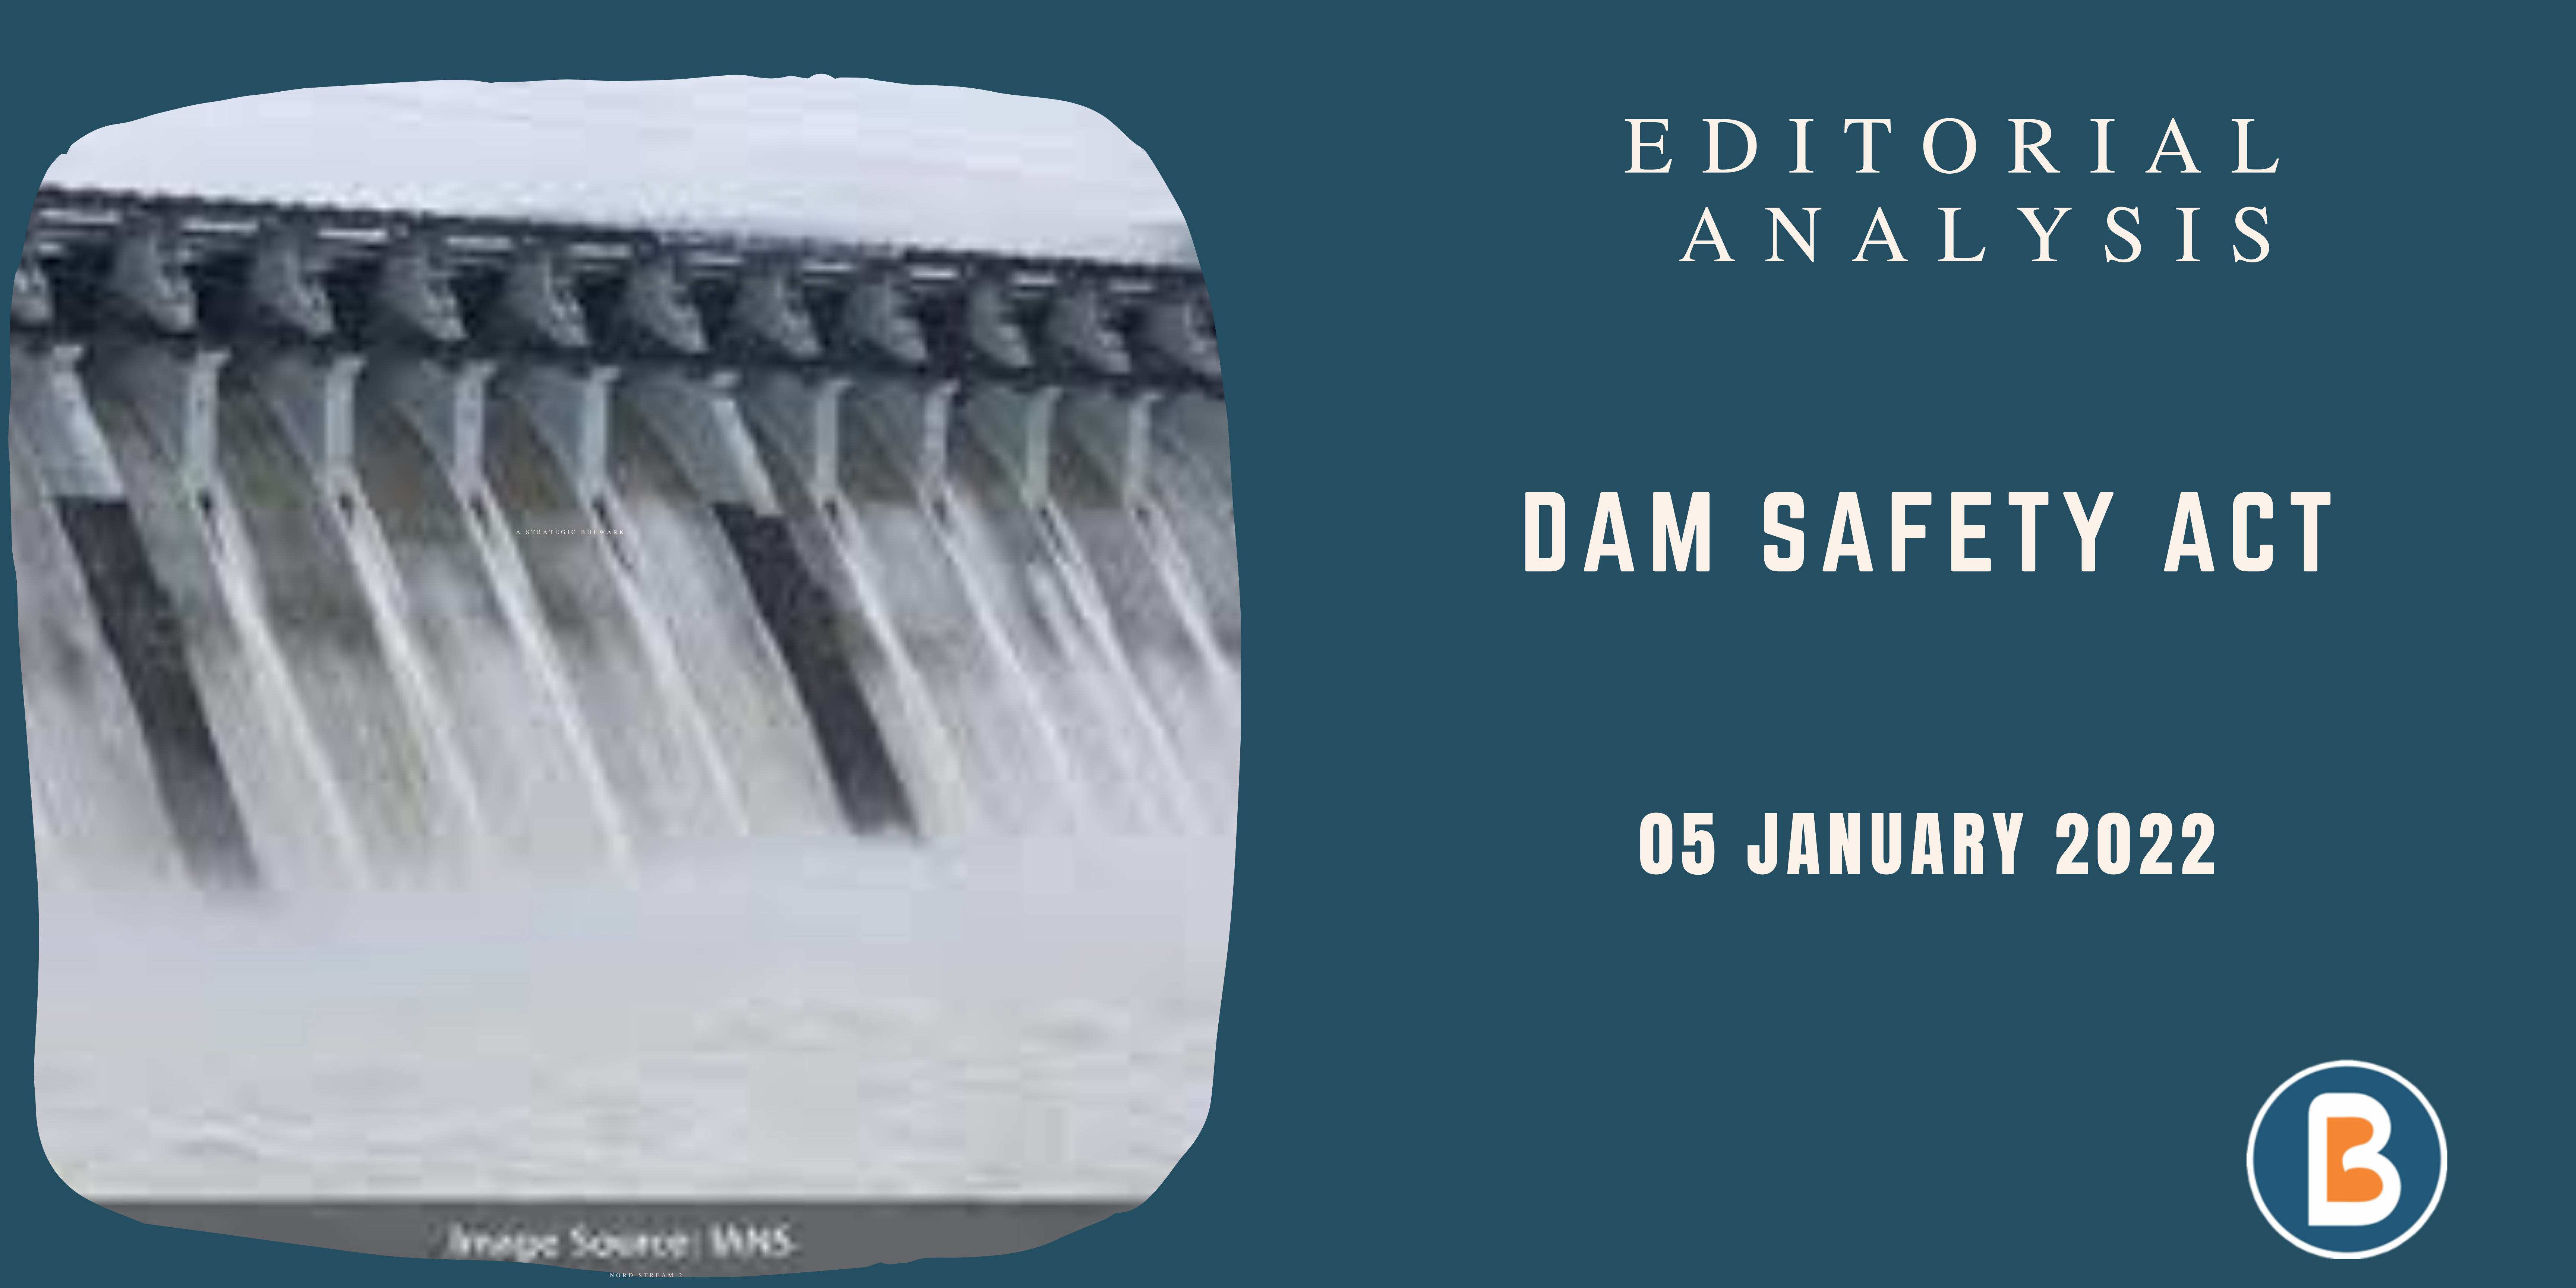 Editorial Analysis for UPSC - DAM SAFETY ACT